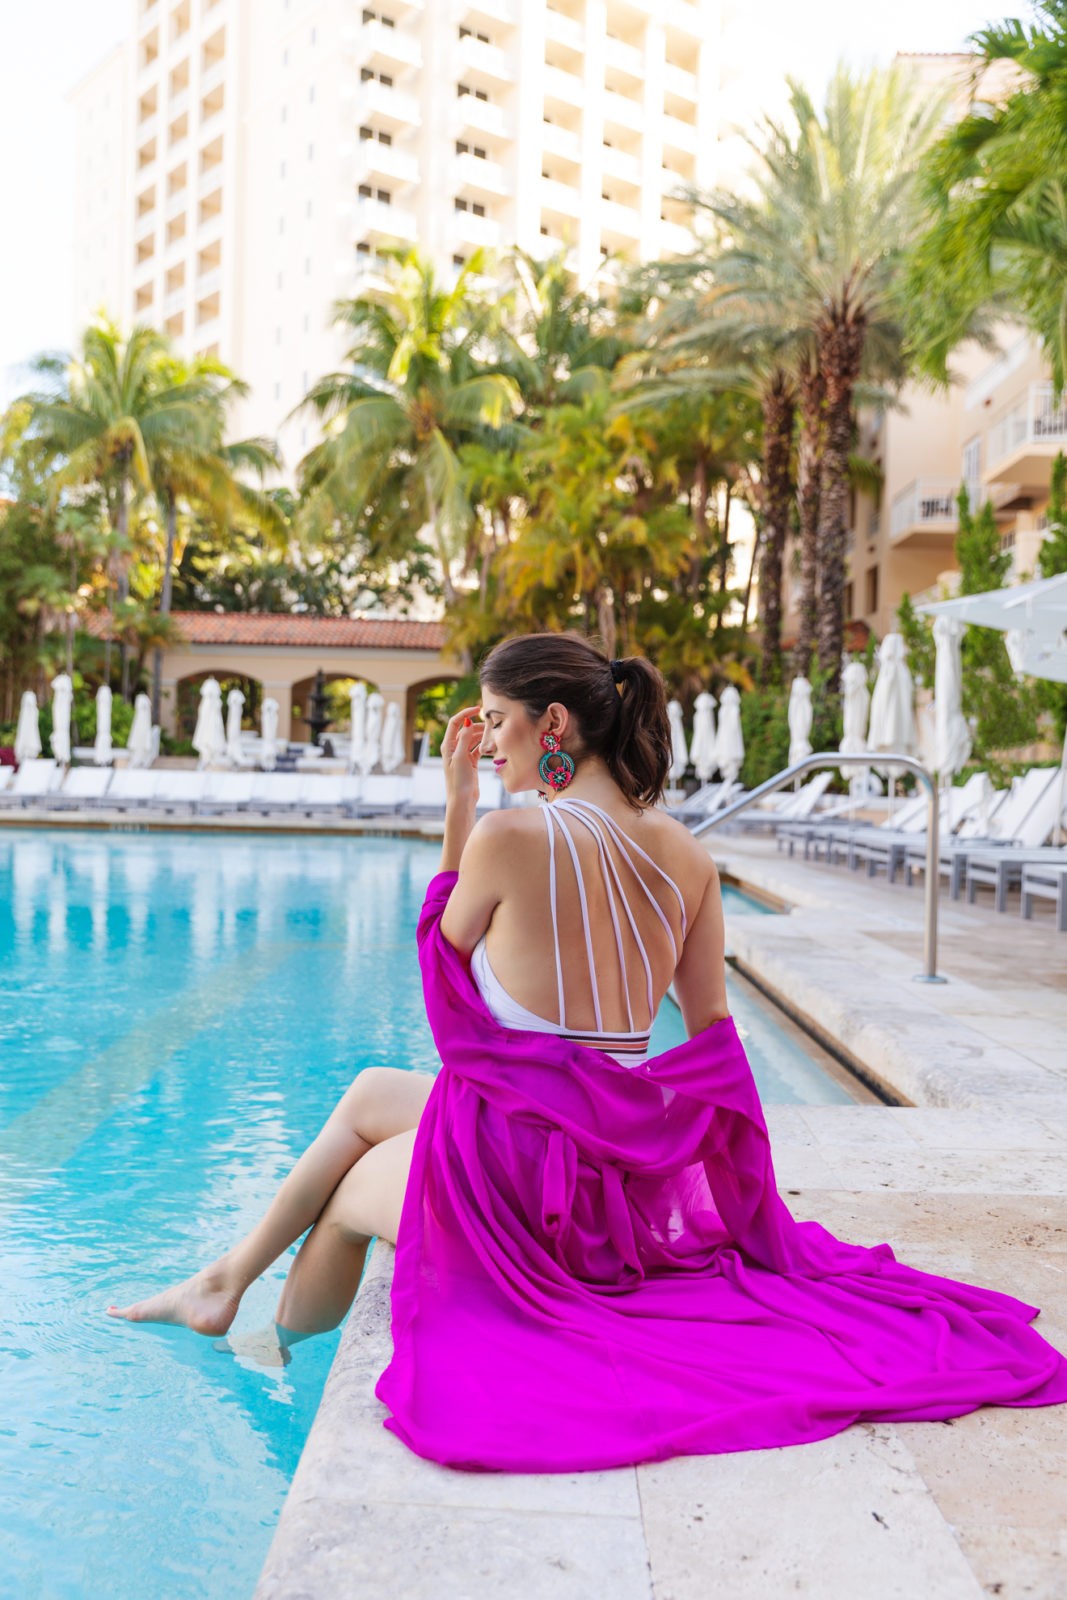 JW Marriott Turnberry Resort Miami by popular travel blogger, Laura Lily: image of a woman sitting at the edge of the pool with her feet in the water.